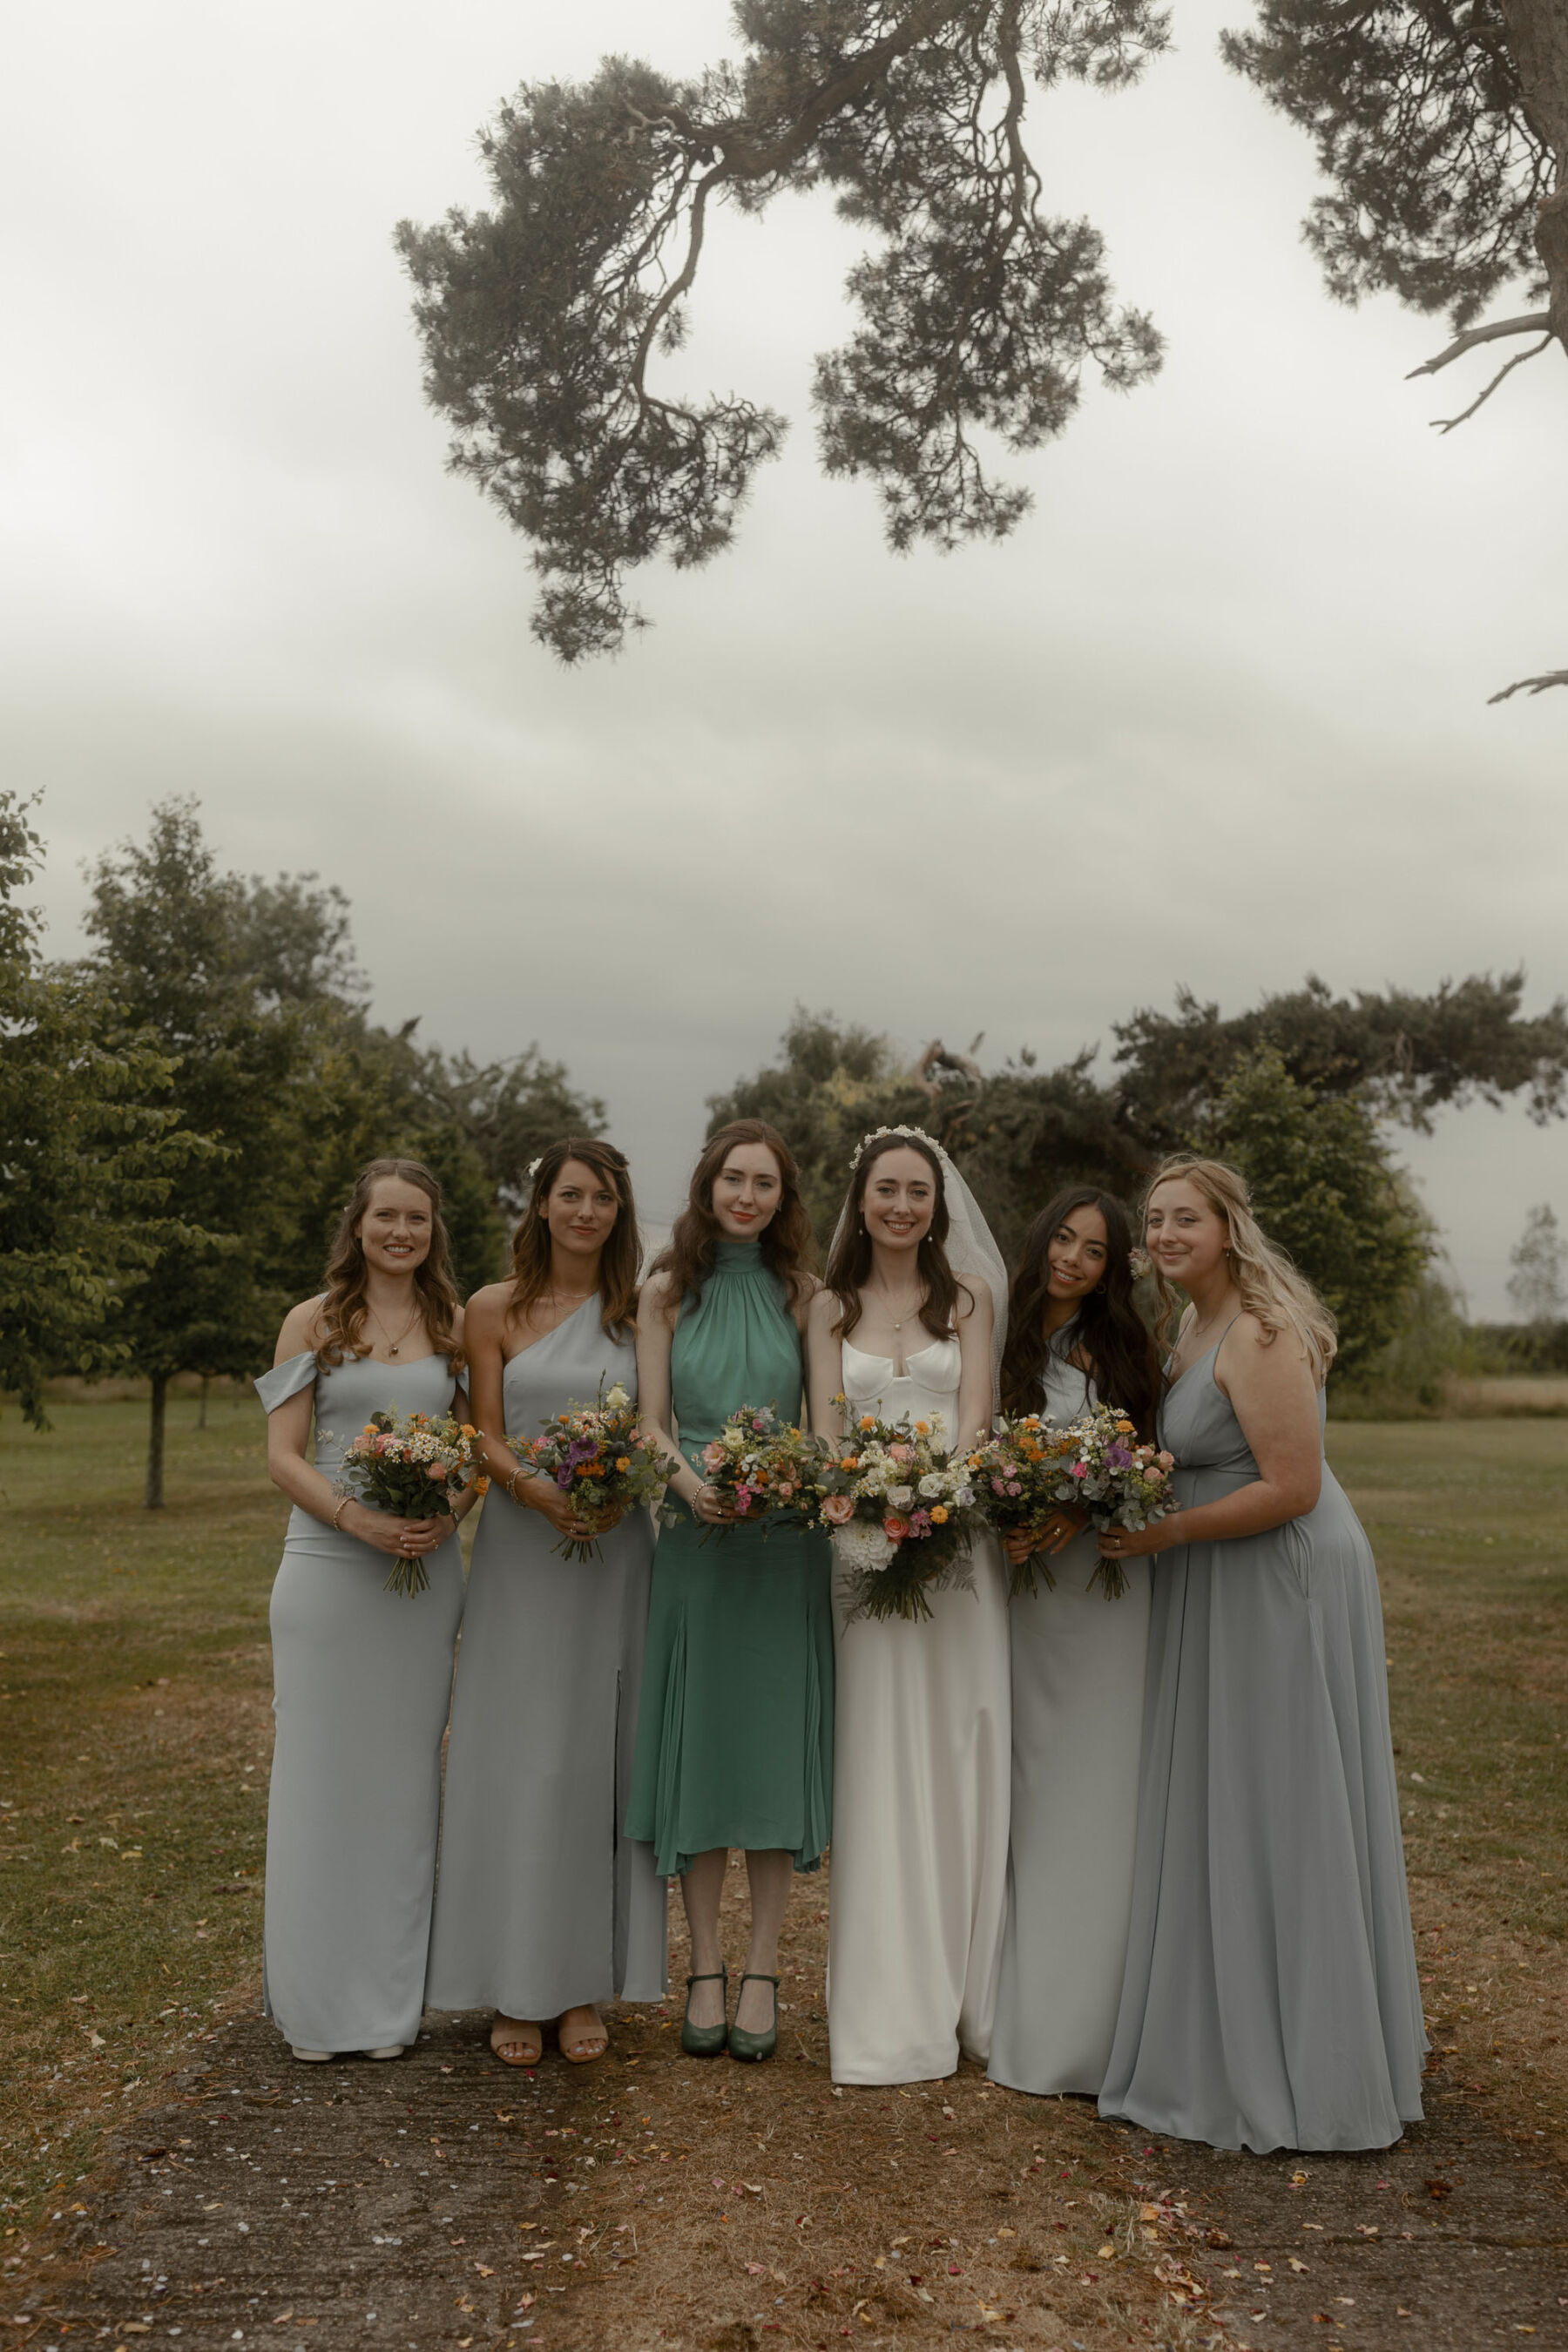 Bridesmaids in pale blue and green dresses.